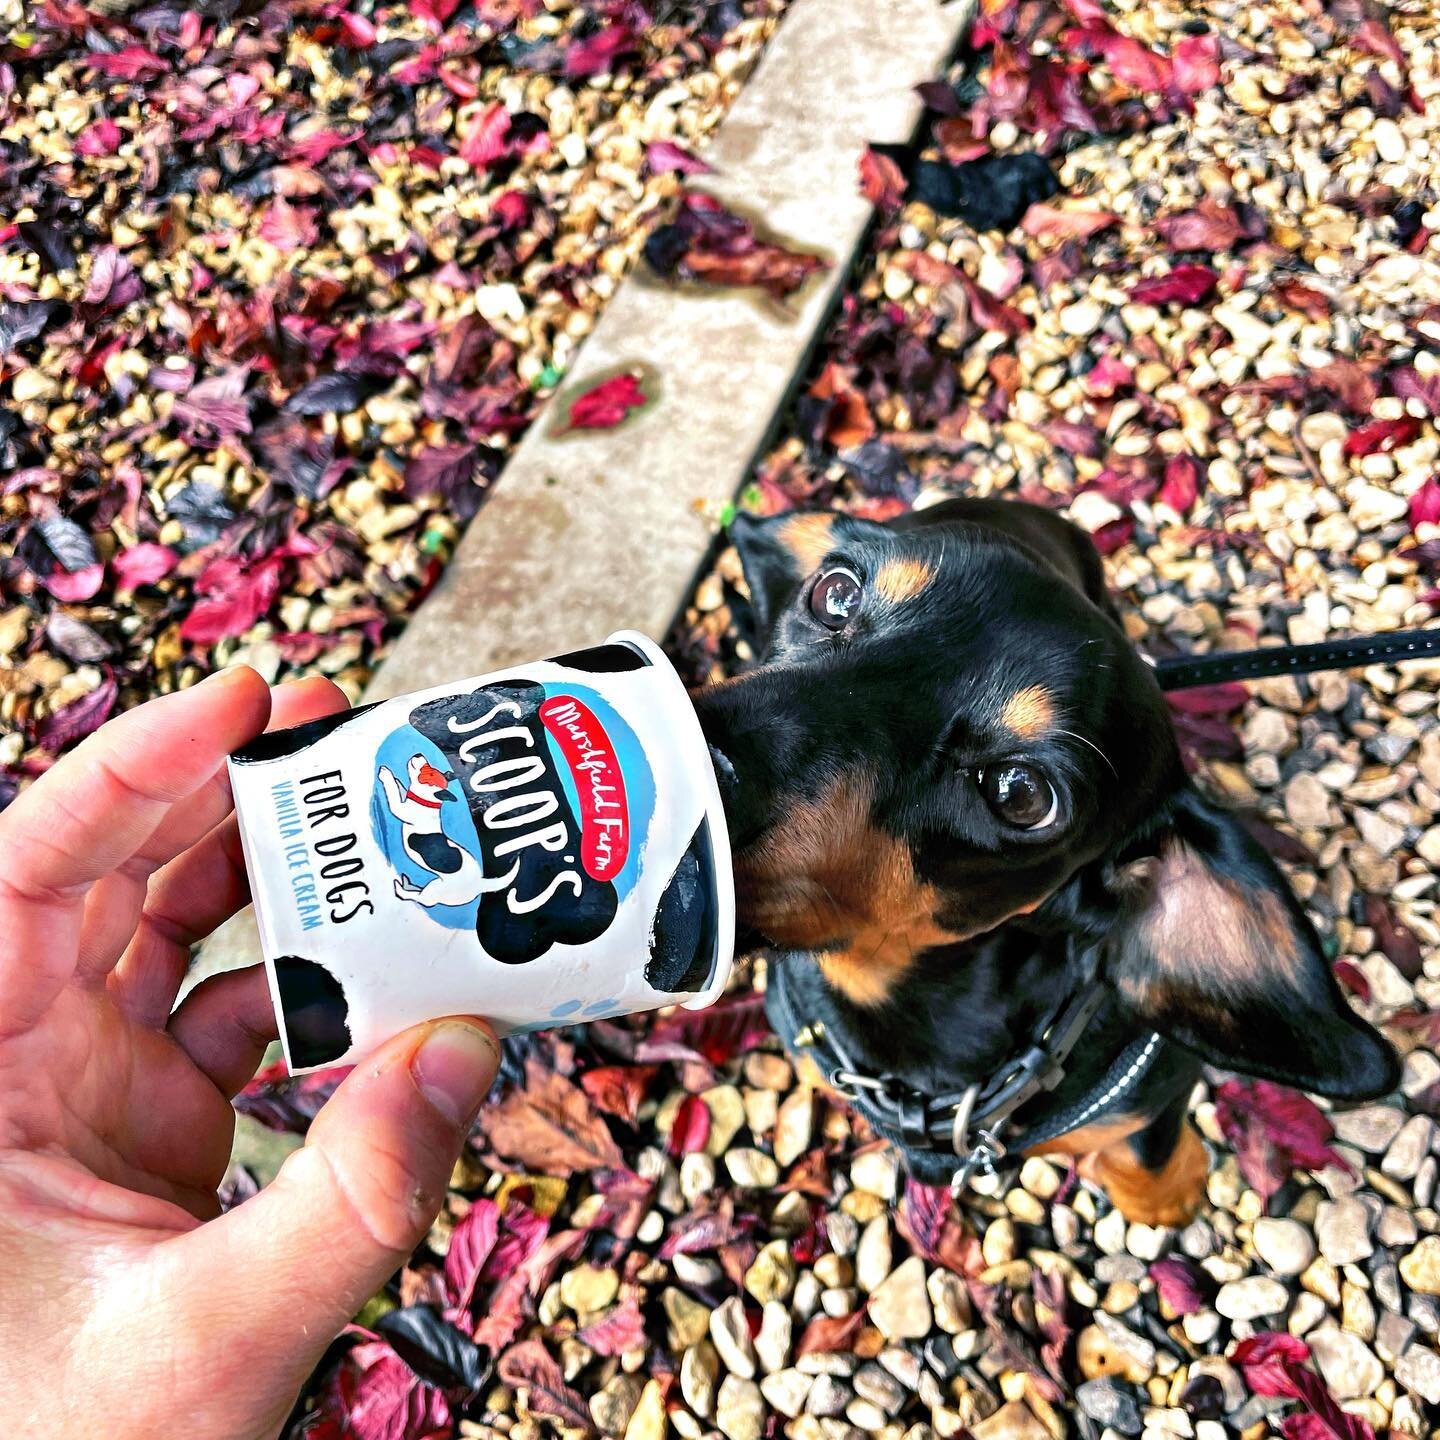 Treats For Doggo?🐶 Ozzie loved his little taster of marshfield ice cream! 
&bull;
We&rsquo;ve got lots of these in stock plus loads of other delicious flavours from Marshfield for us humans☀️
&bull;
#theorchardcoffeeandco #icecream #marshfield #dog 